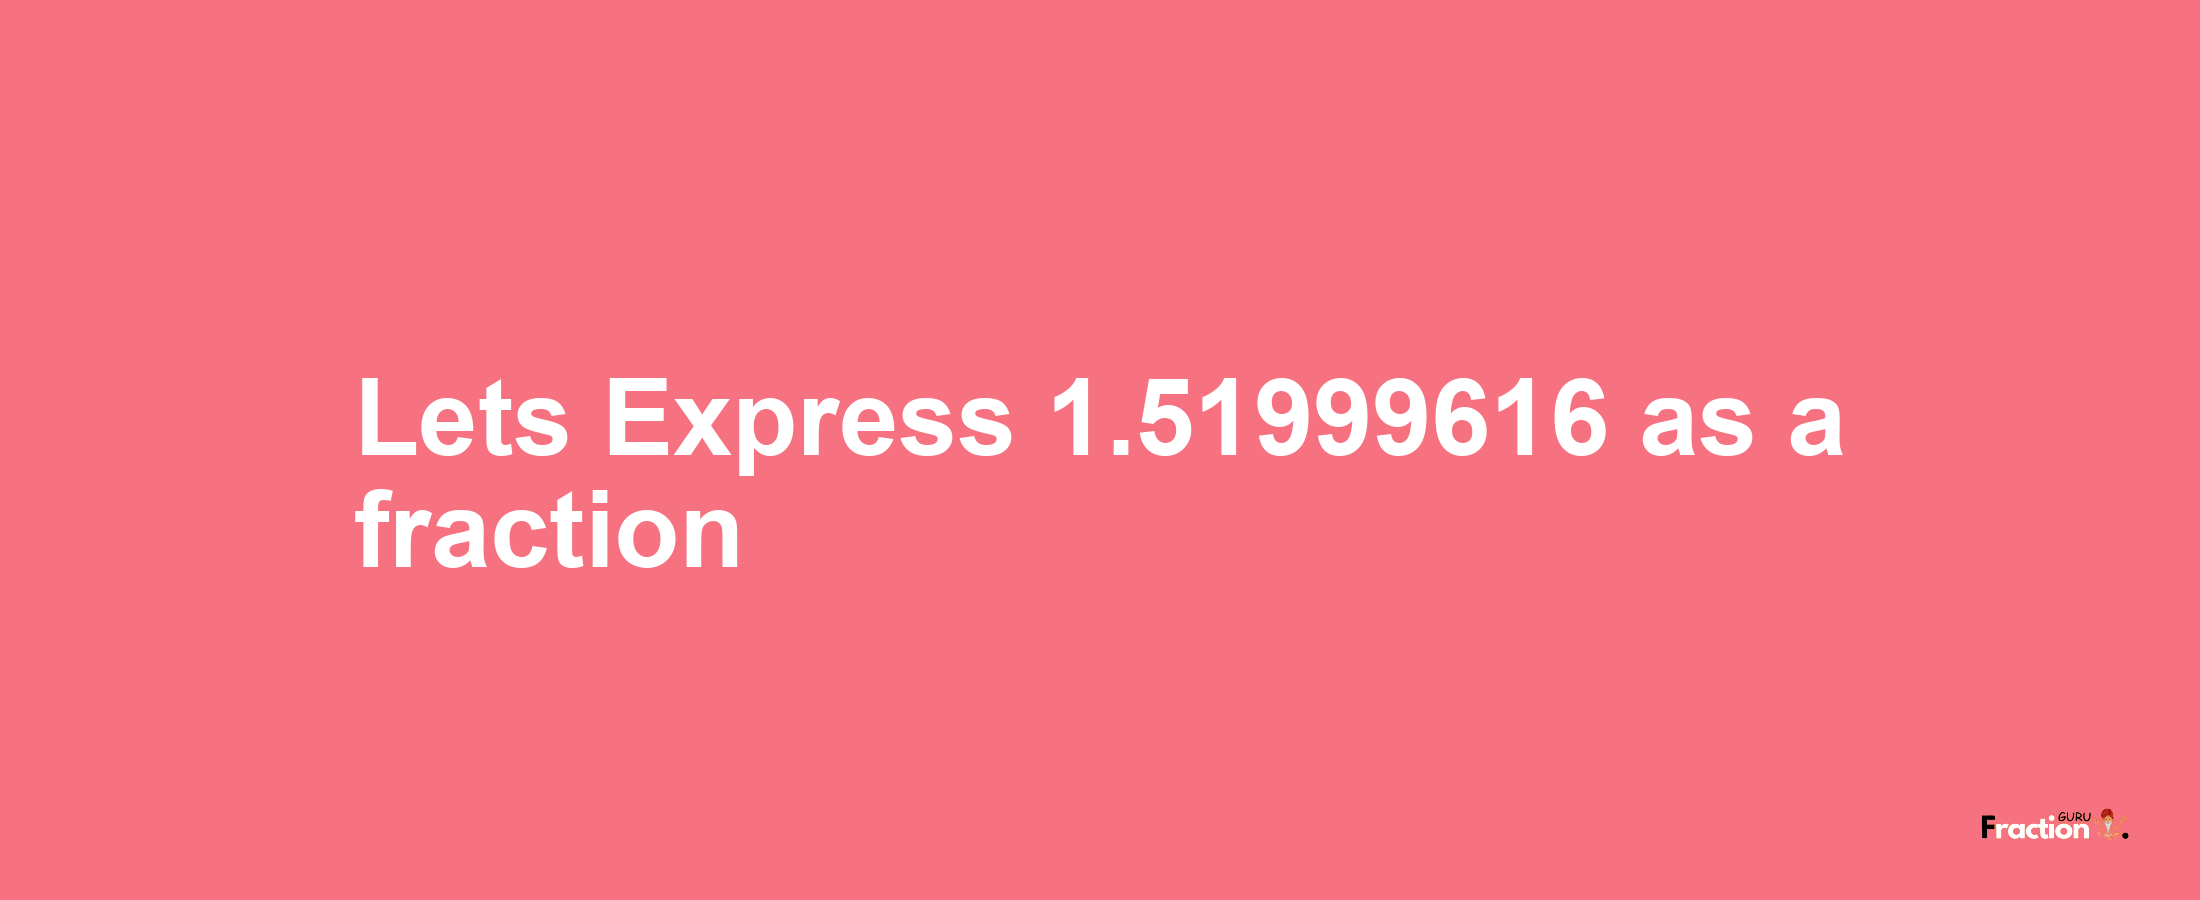 Lets Express 1.51999616 as afraction